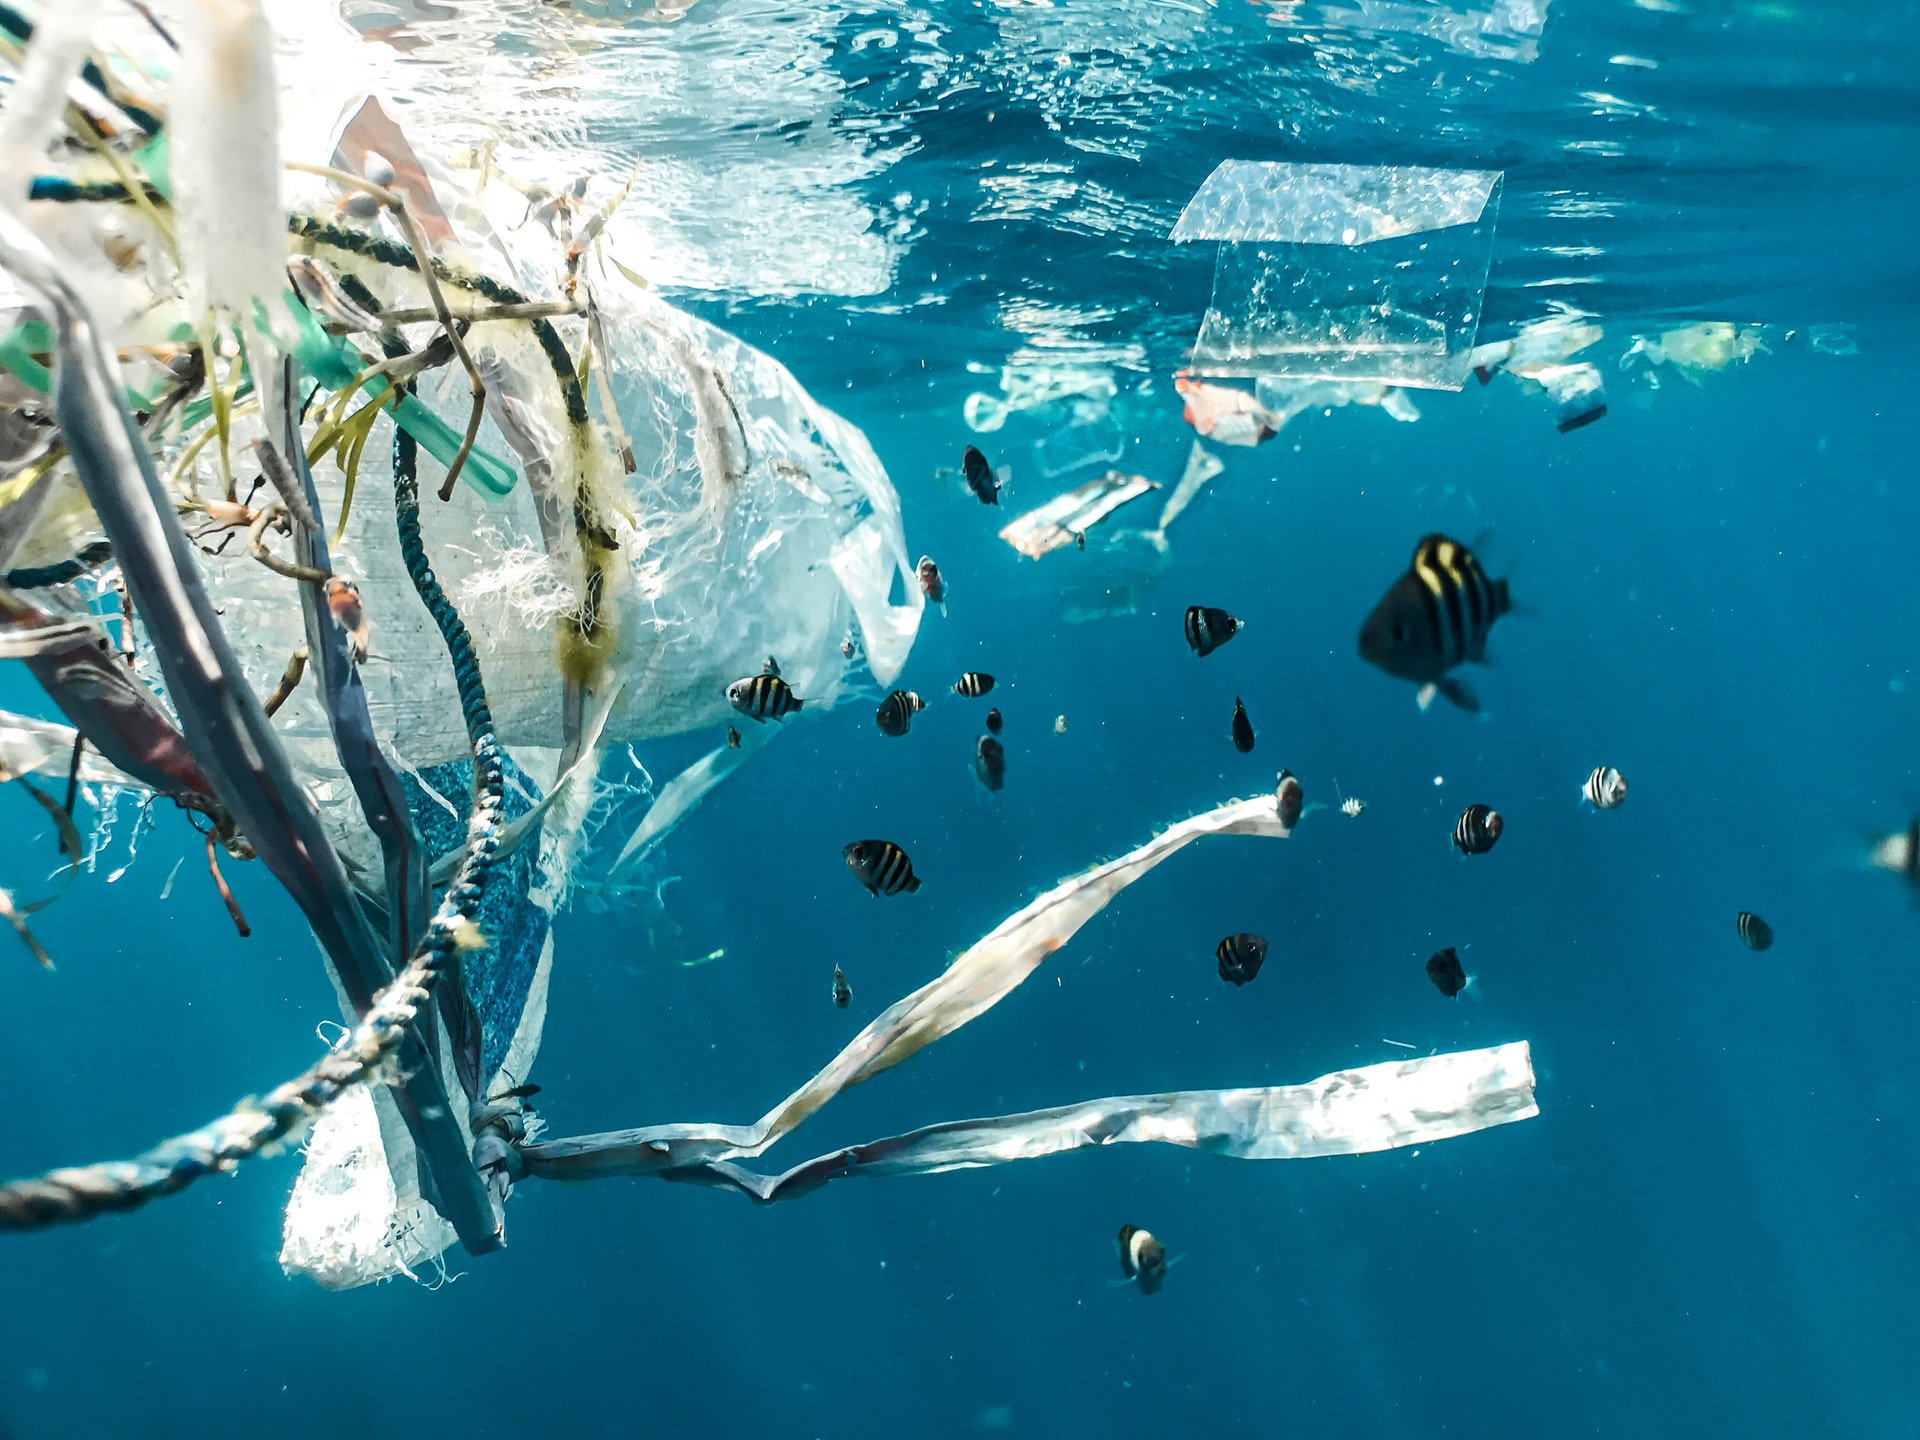 175 countries agree to first-of-its-kind plastic waste treaty